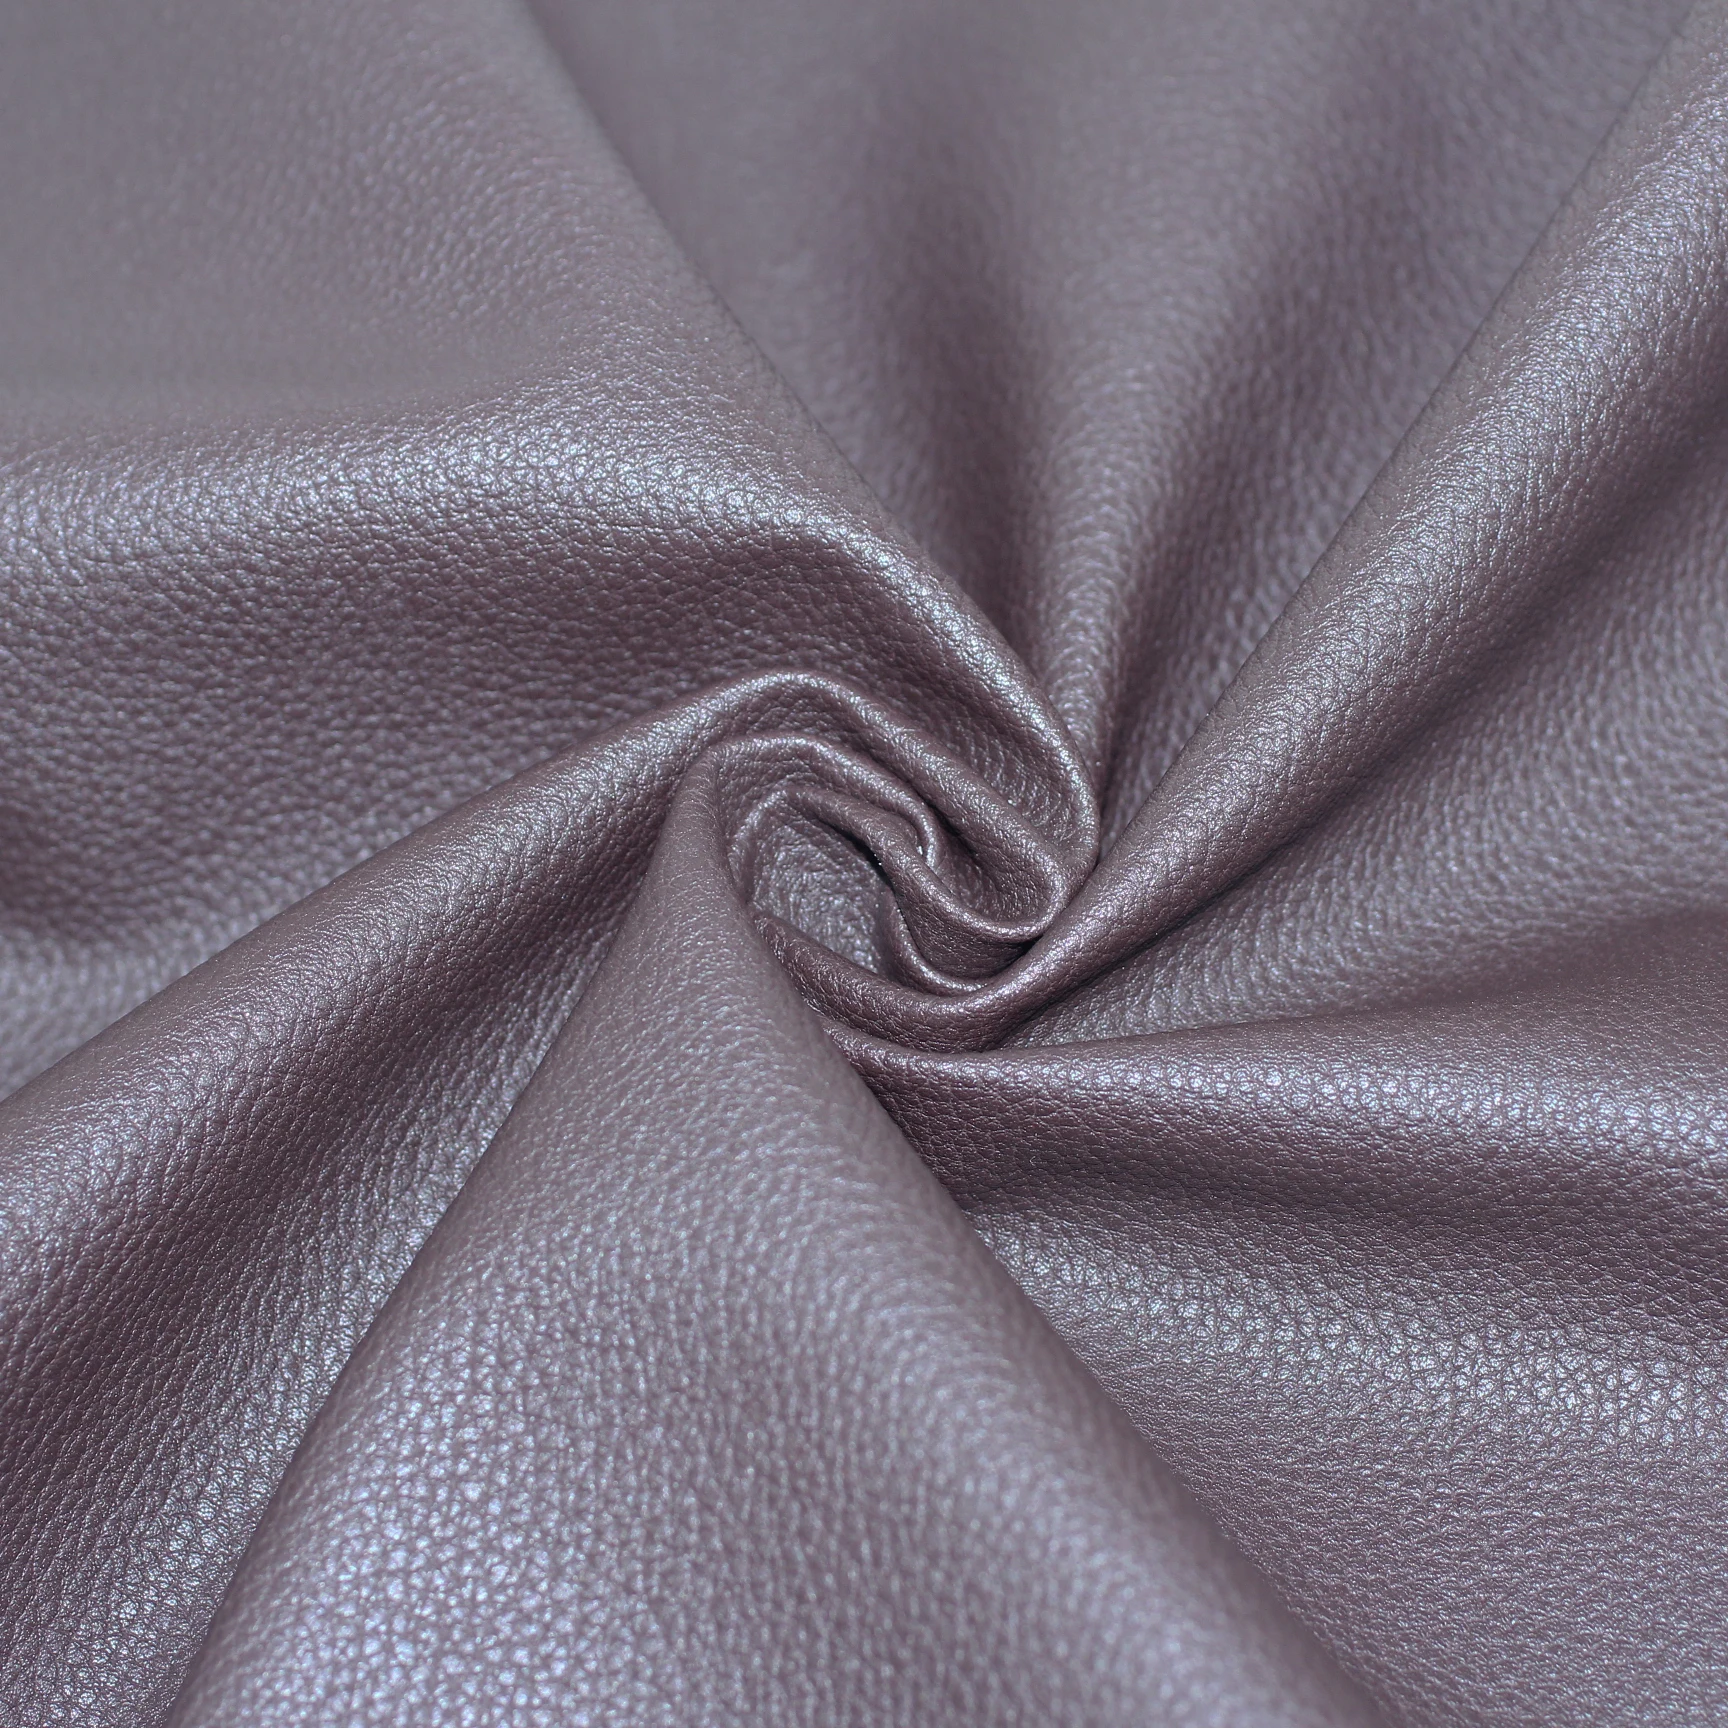 where to buy synthetic leather